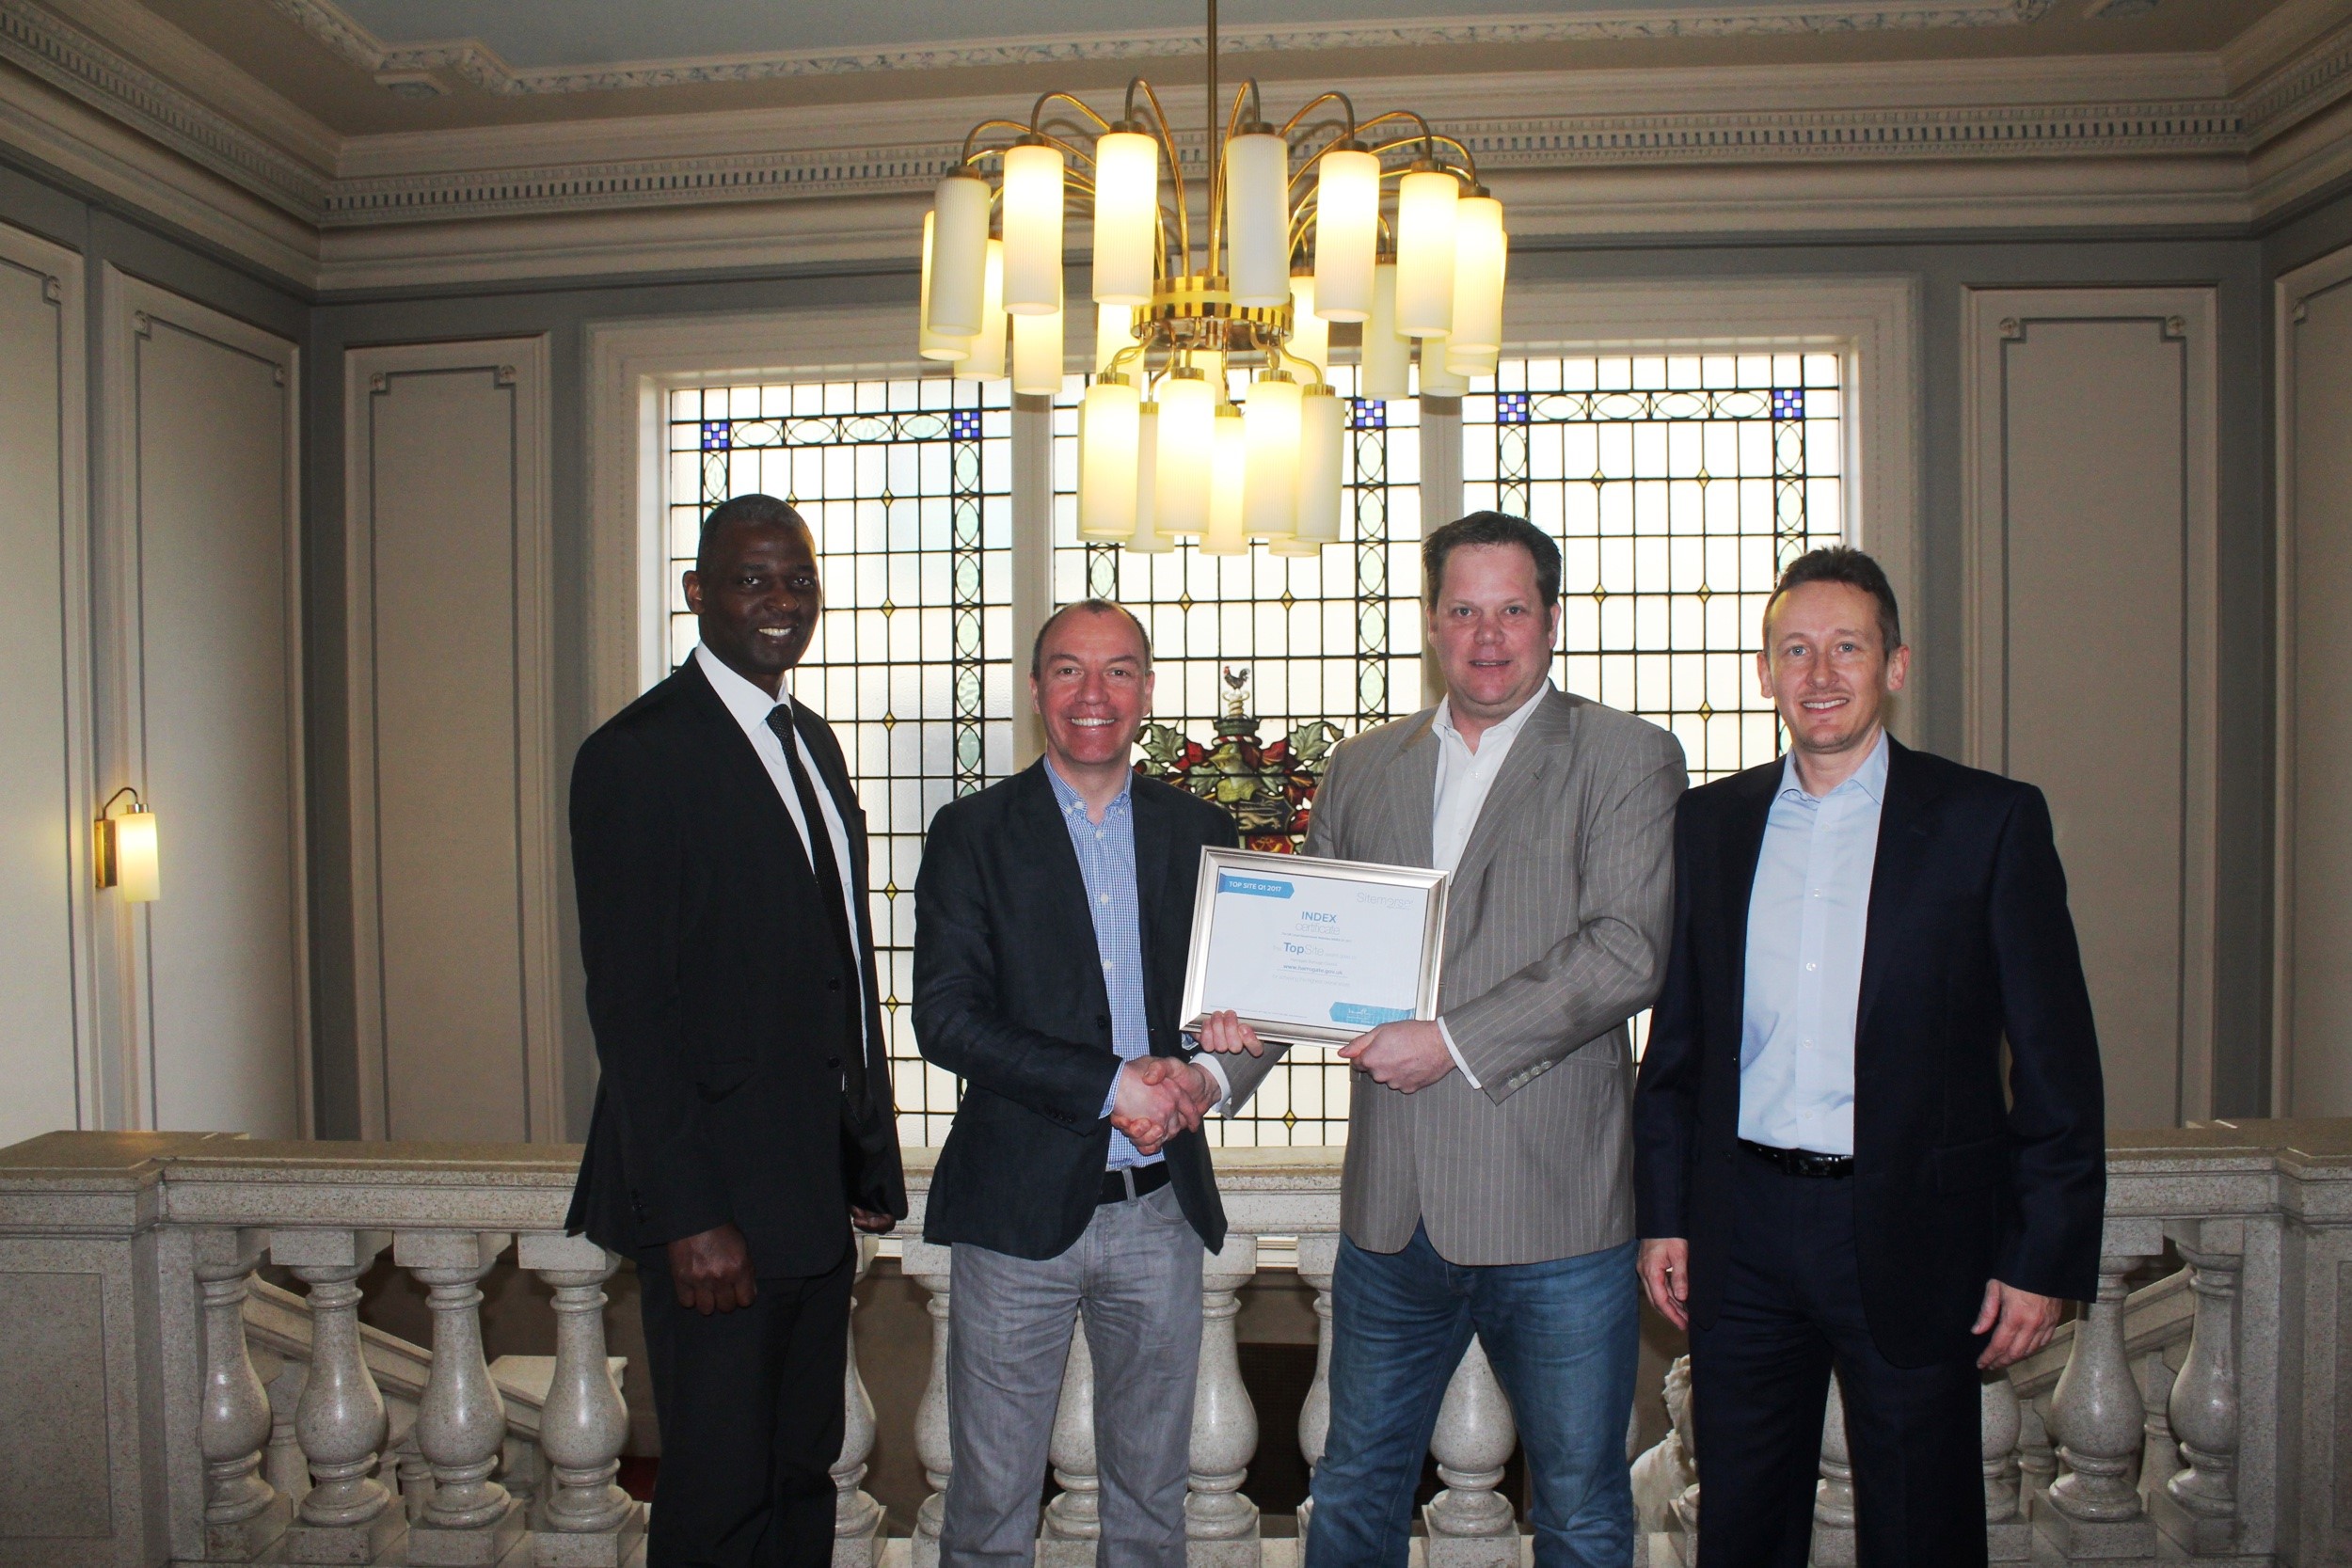 Image of Certificate Handover from Sitemorse to Harrogate